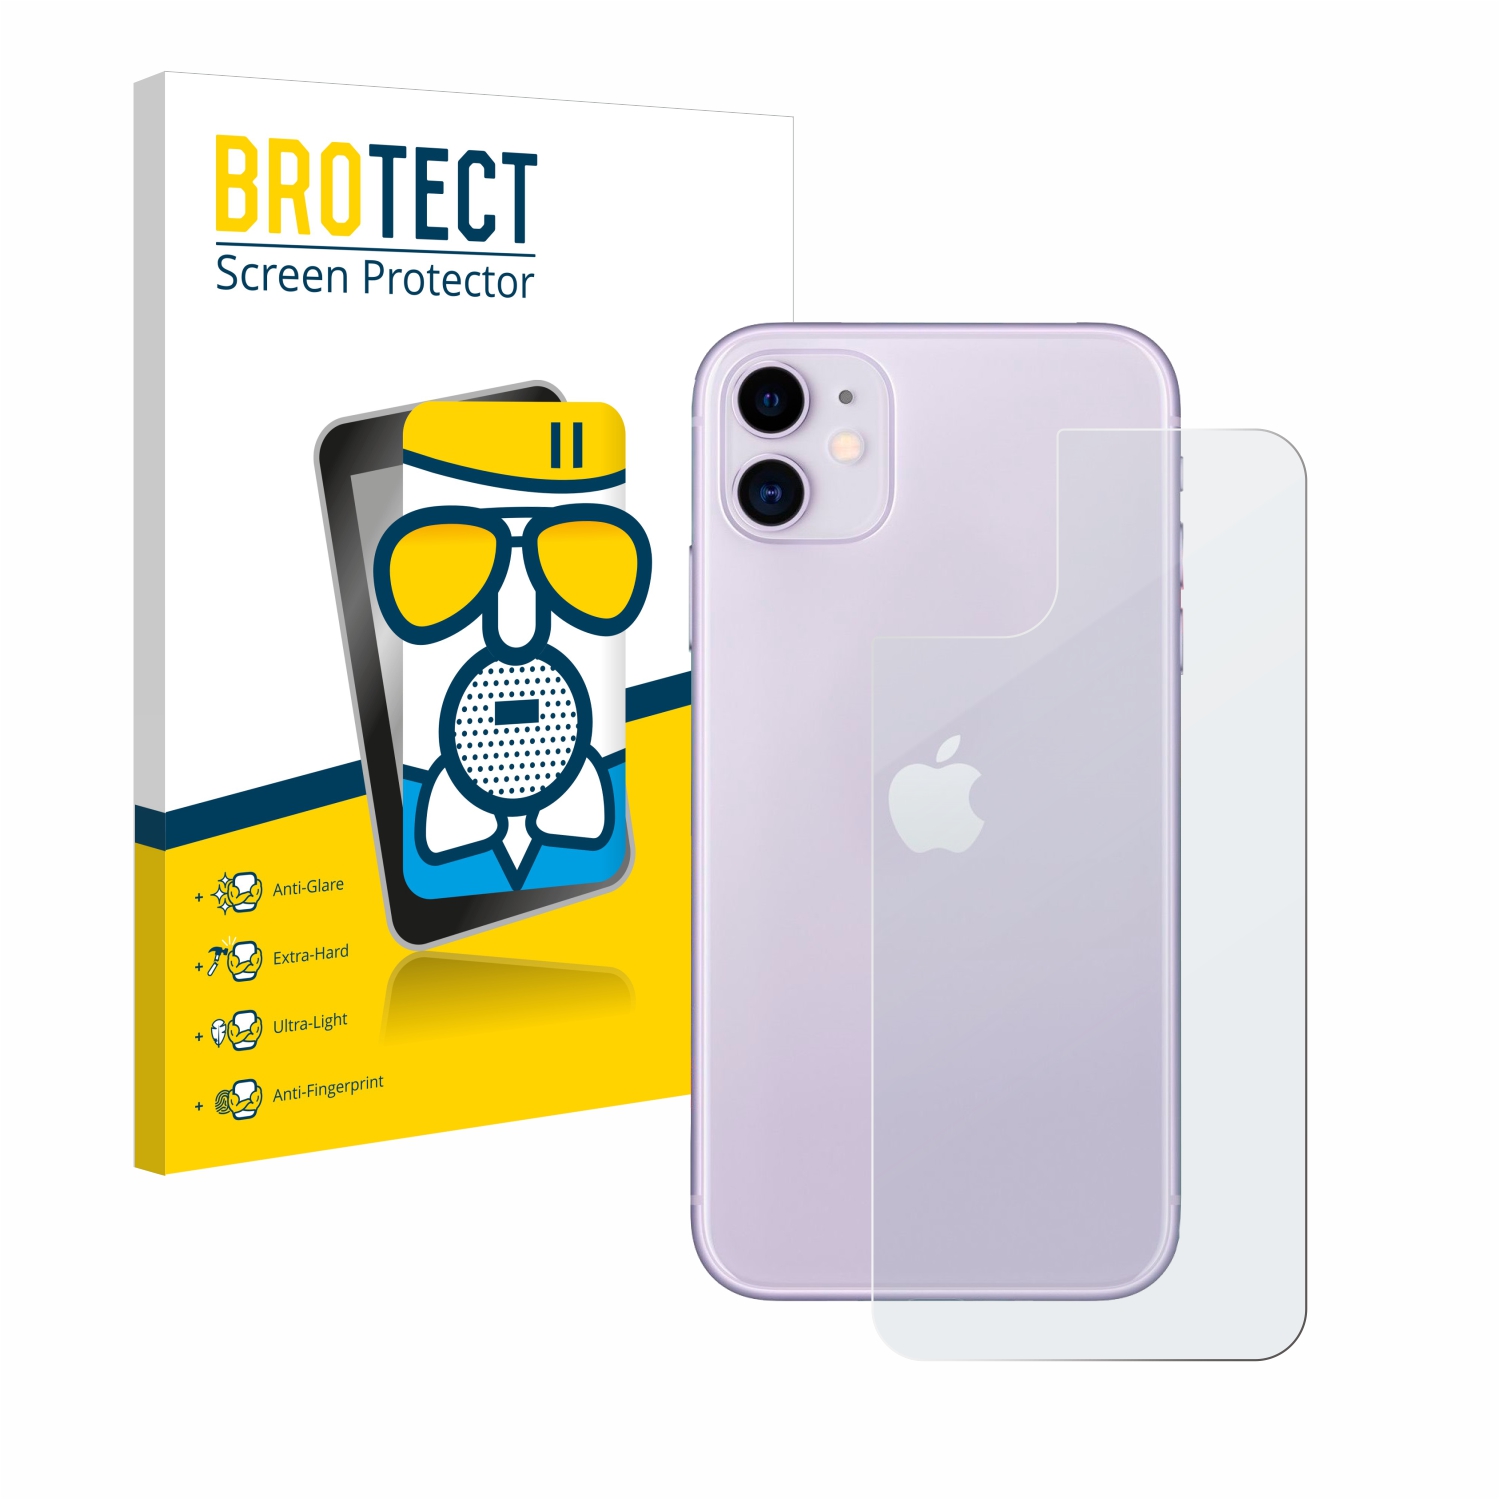 BROTECT AirGlass Matte Glass Screen Protector for Apple iPhone 11 (Back) |  protectionfilms24.com